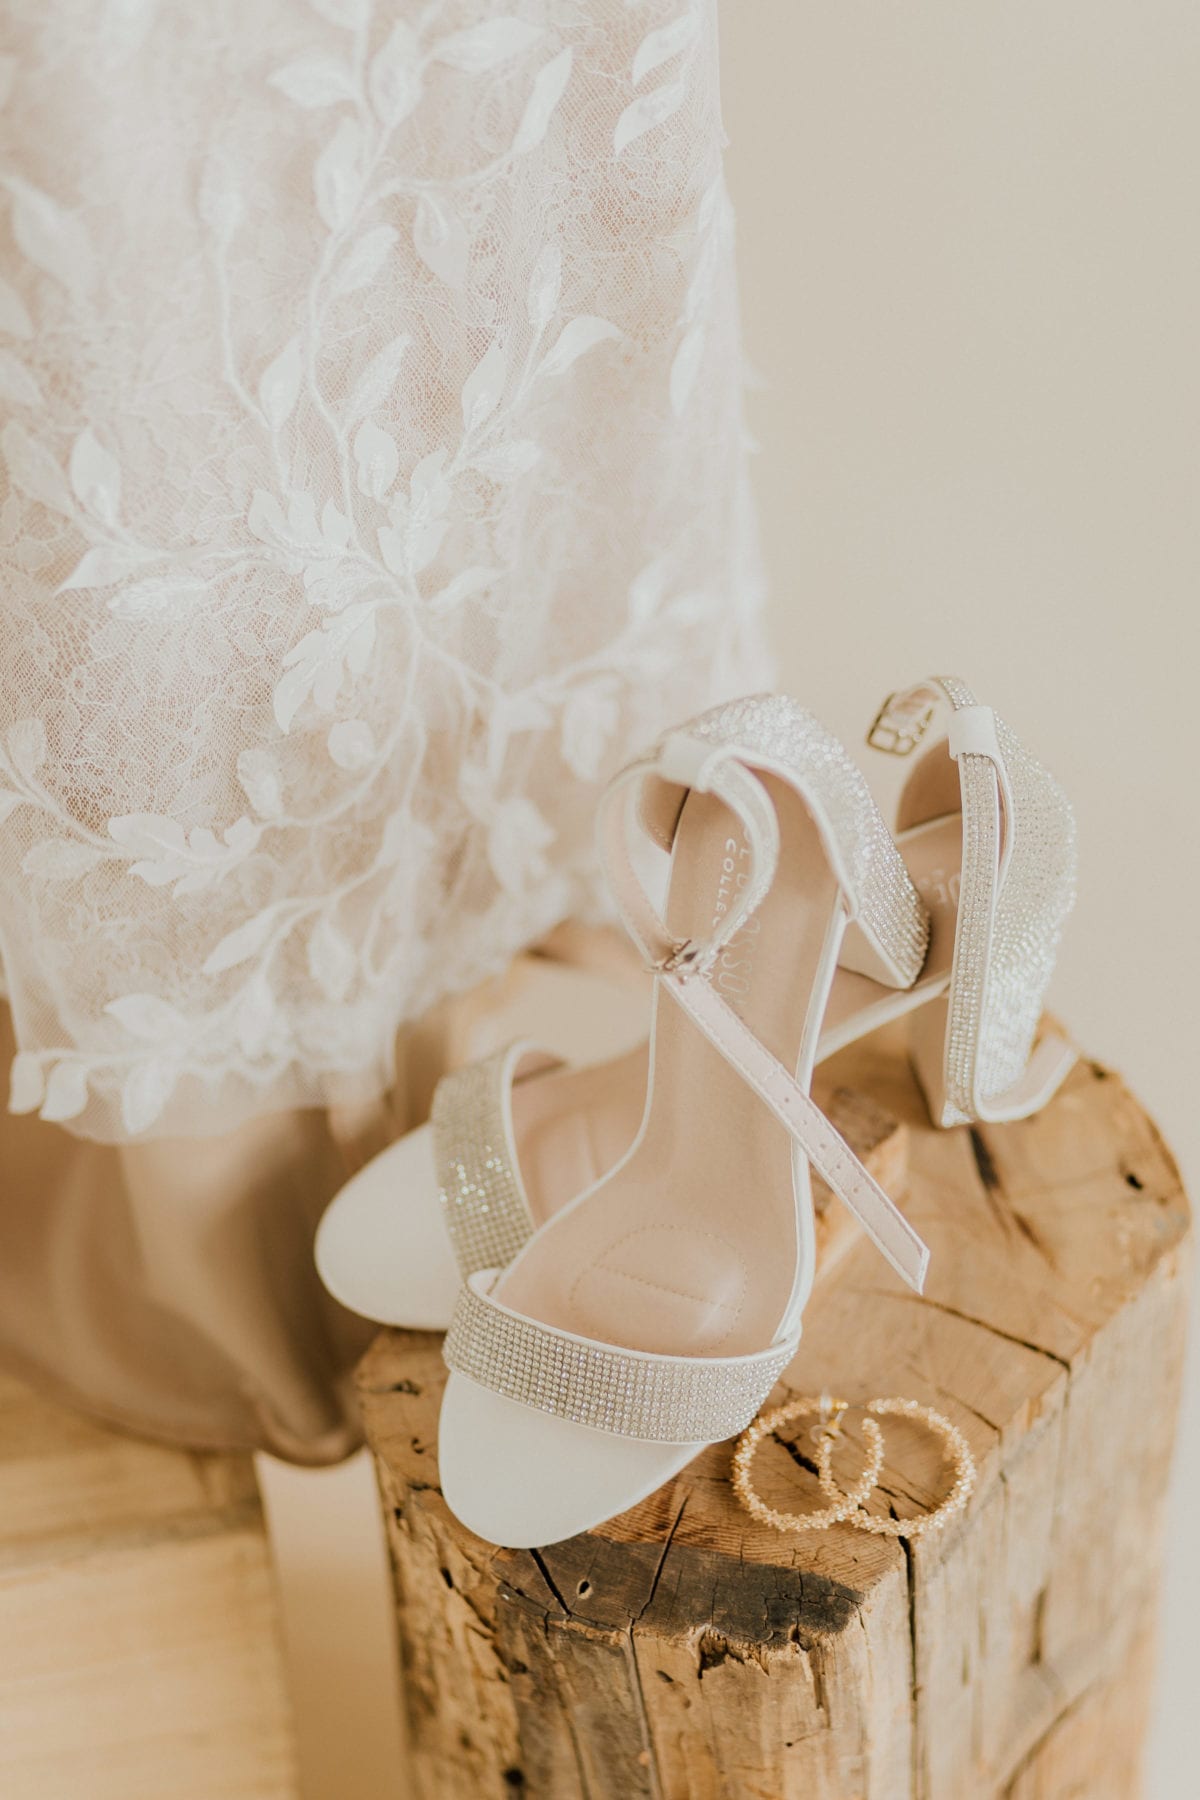 Closeup details of gown and shoes